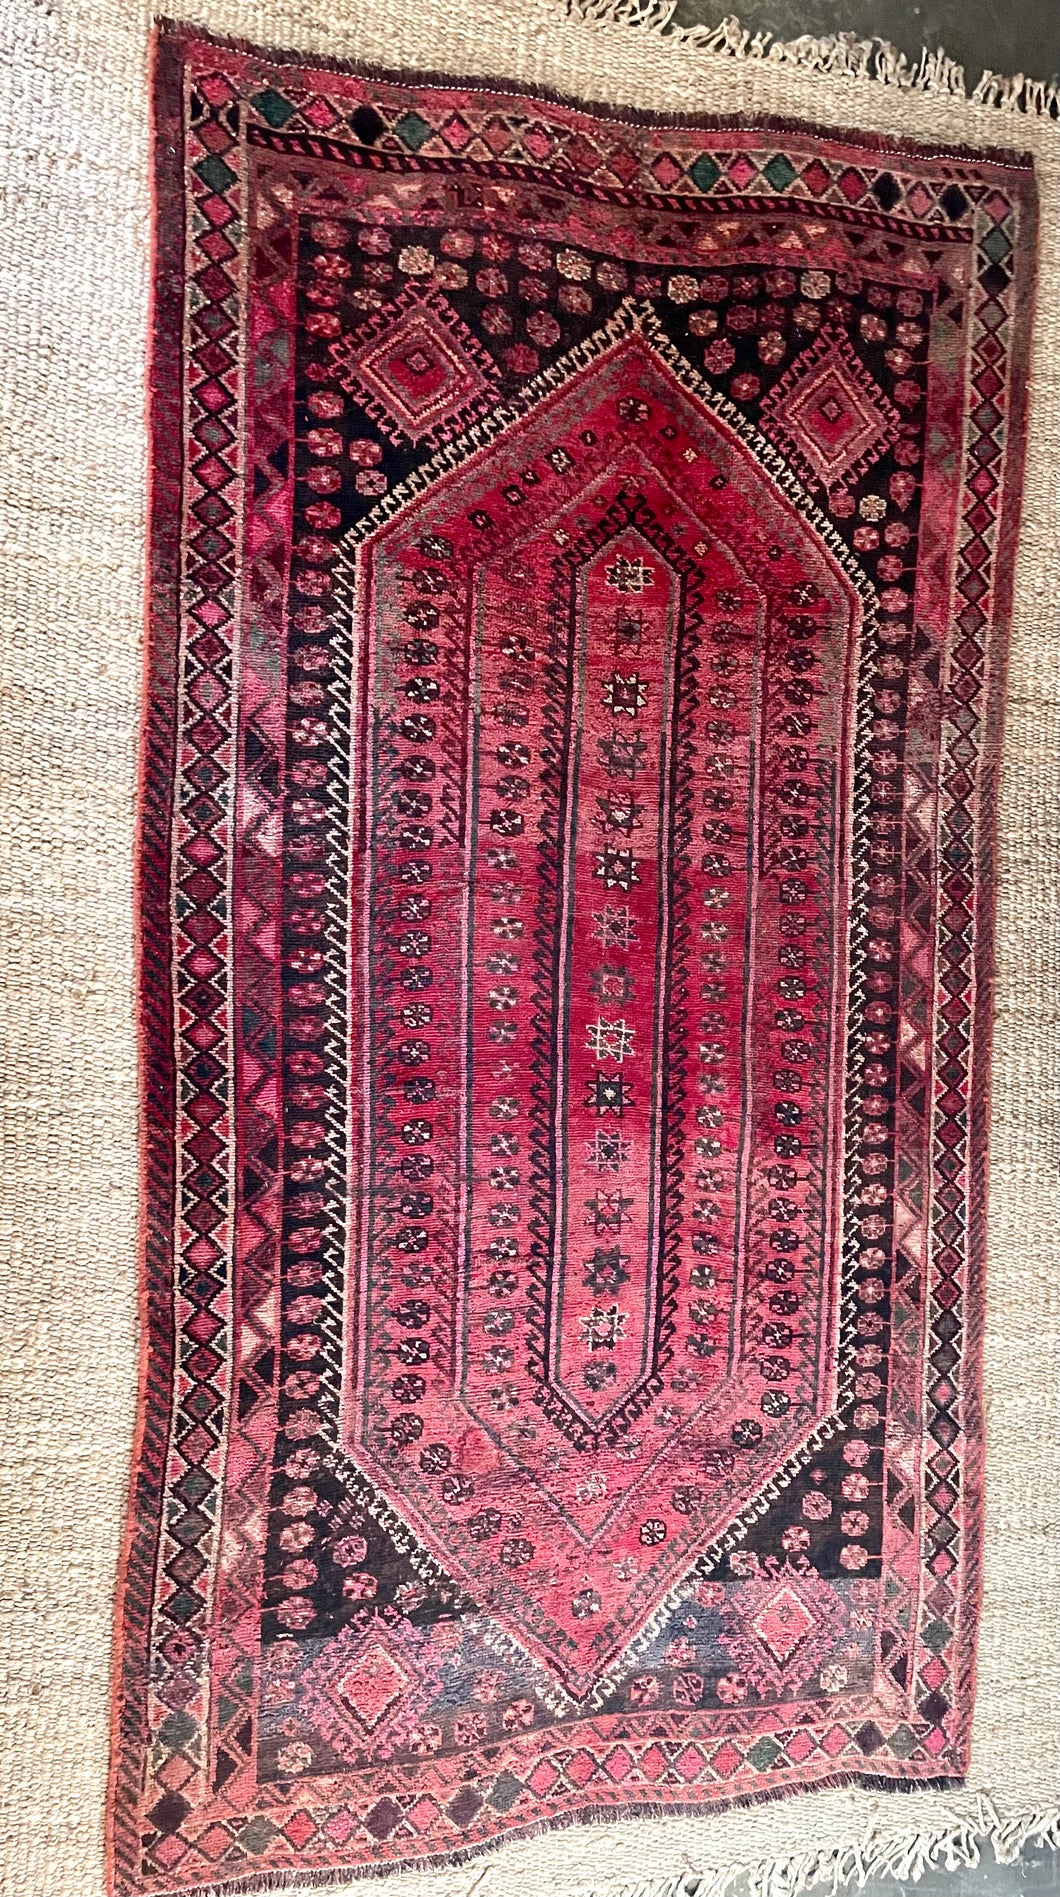 Vintage Hand Knotted Wool Rug